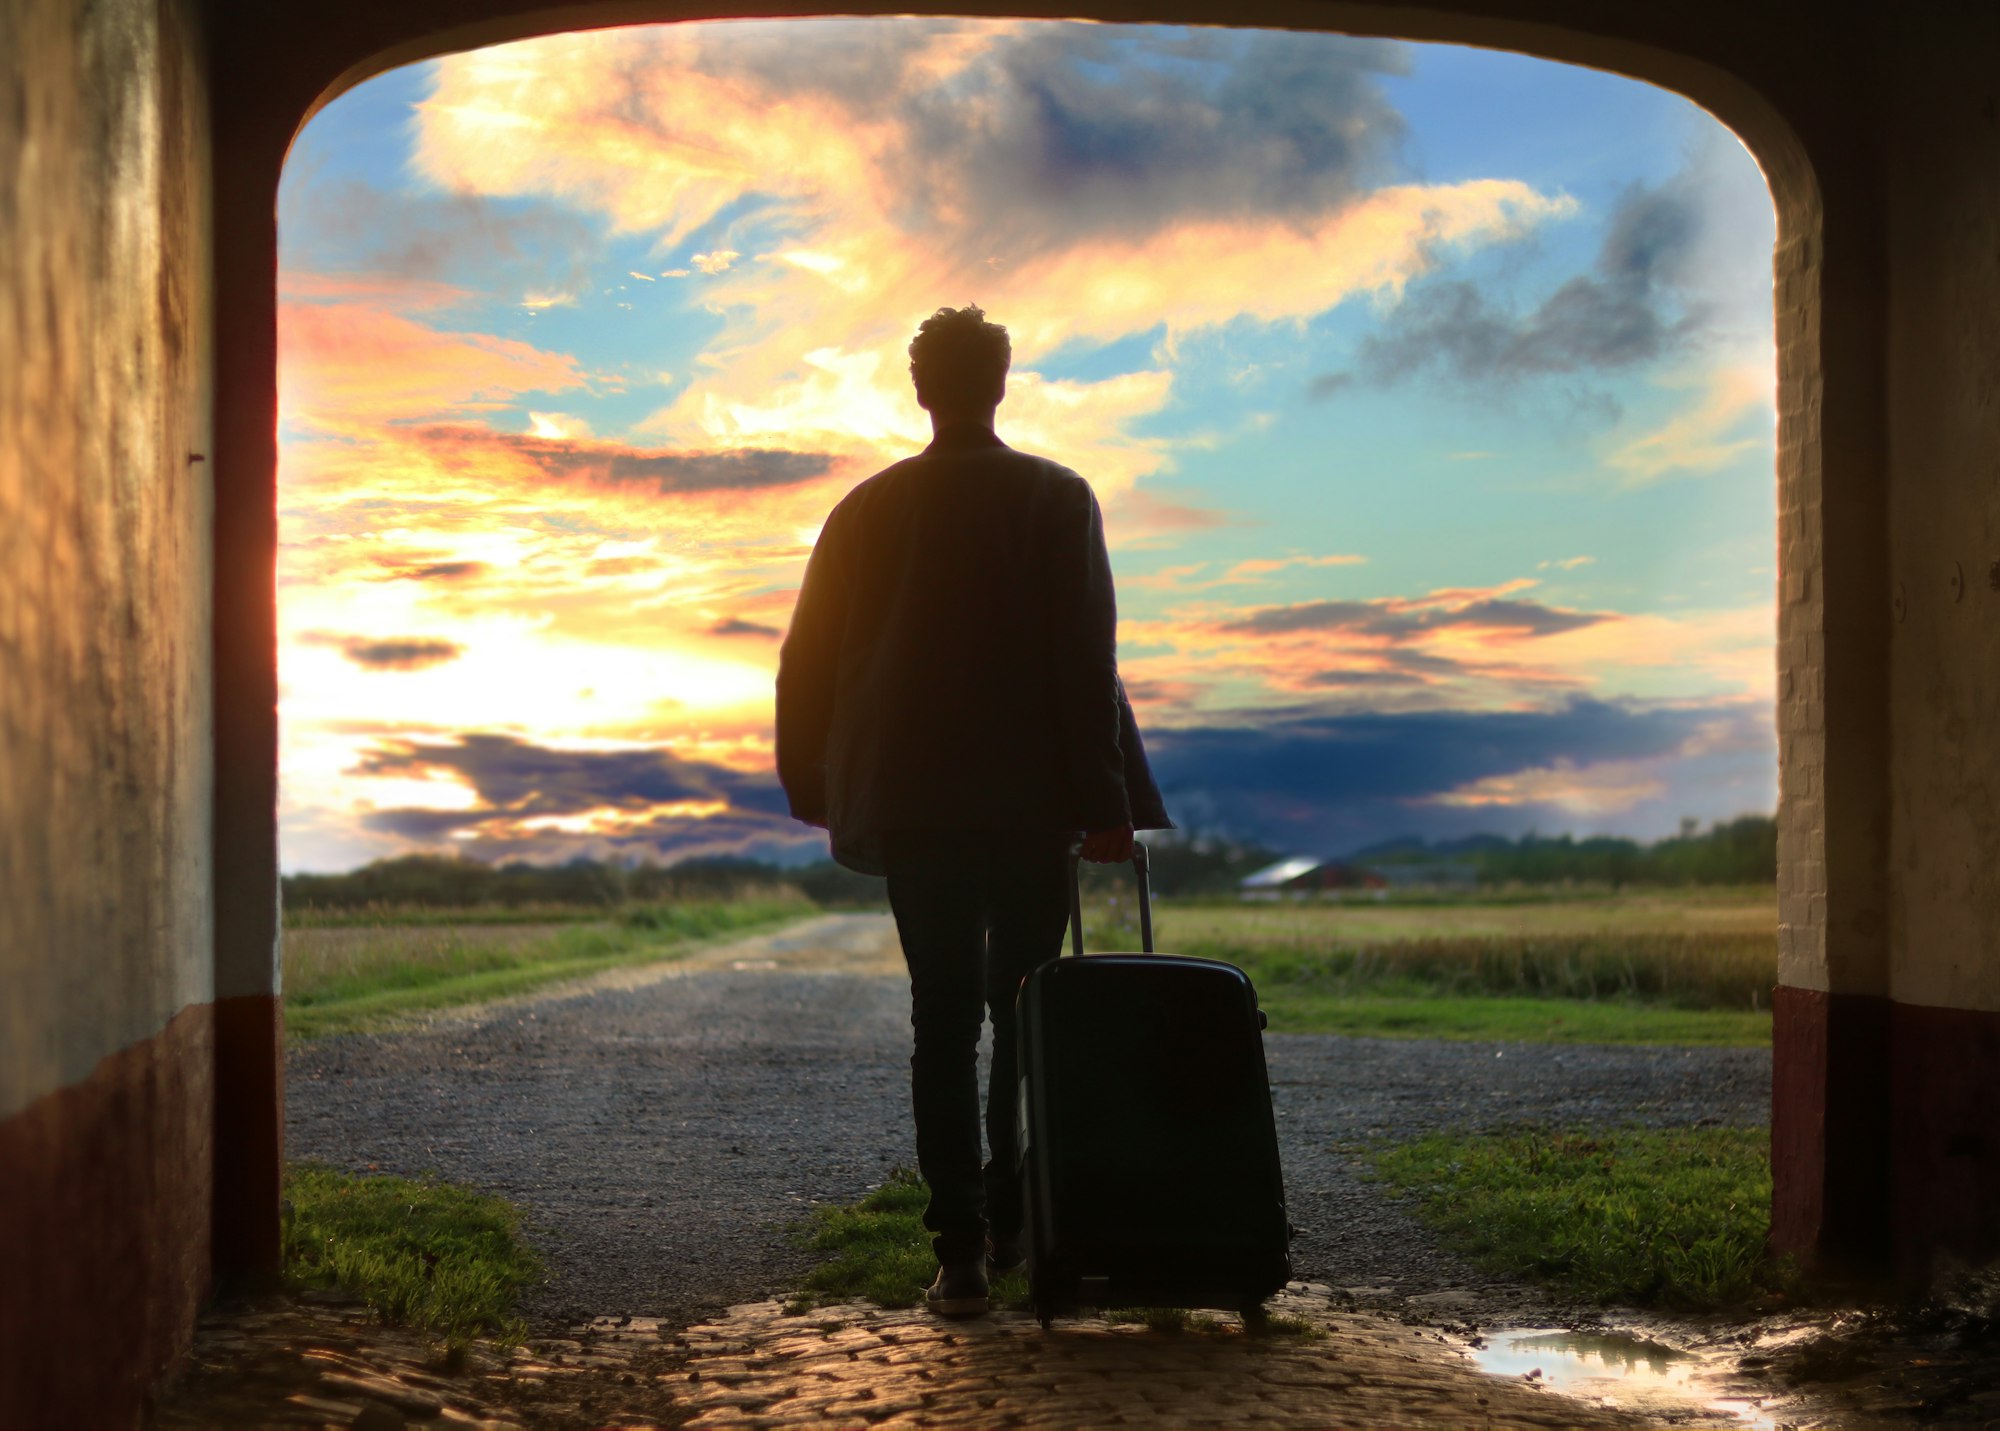 Man with suitcase going through door with nice sky in background